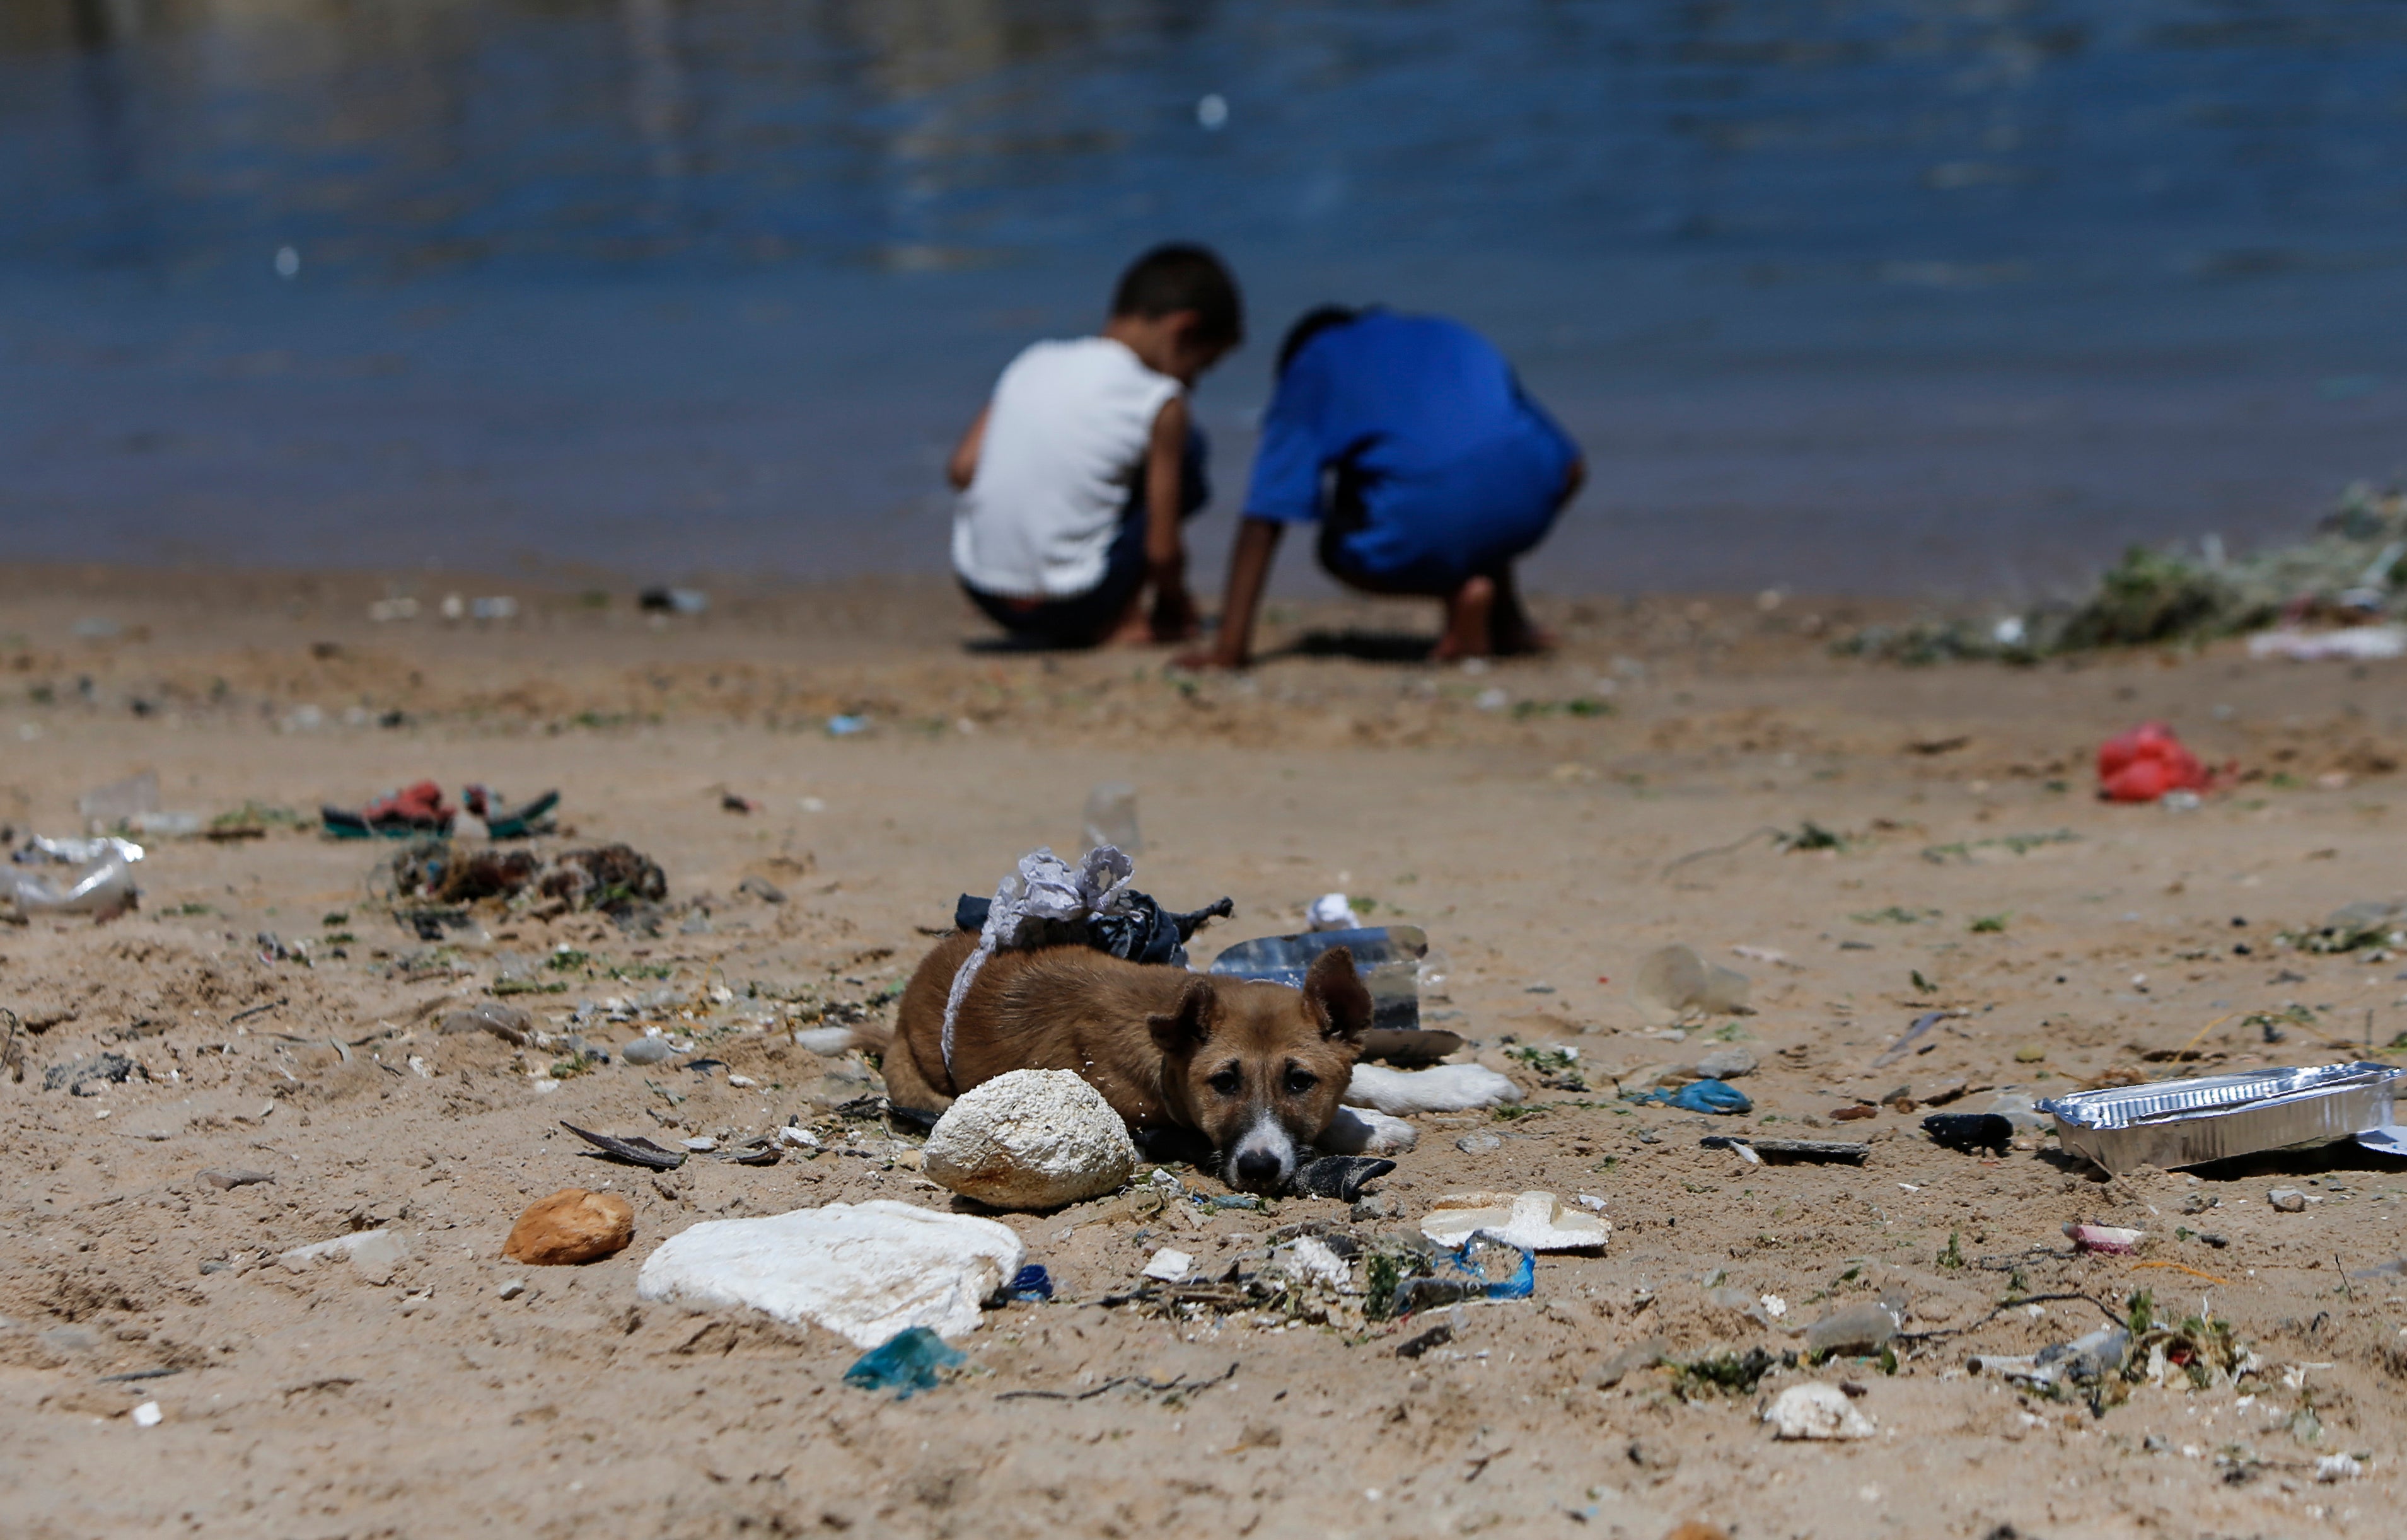 Some of the beaches reopened after Gaza city’s municipality announced it had stopped disposing of untreated wastewater into the sea